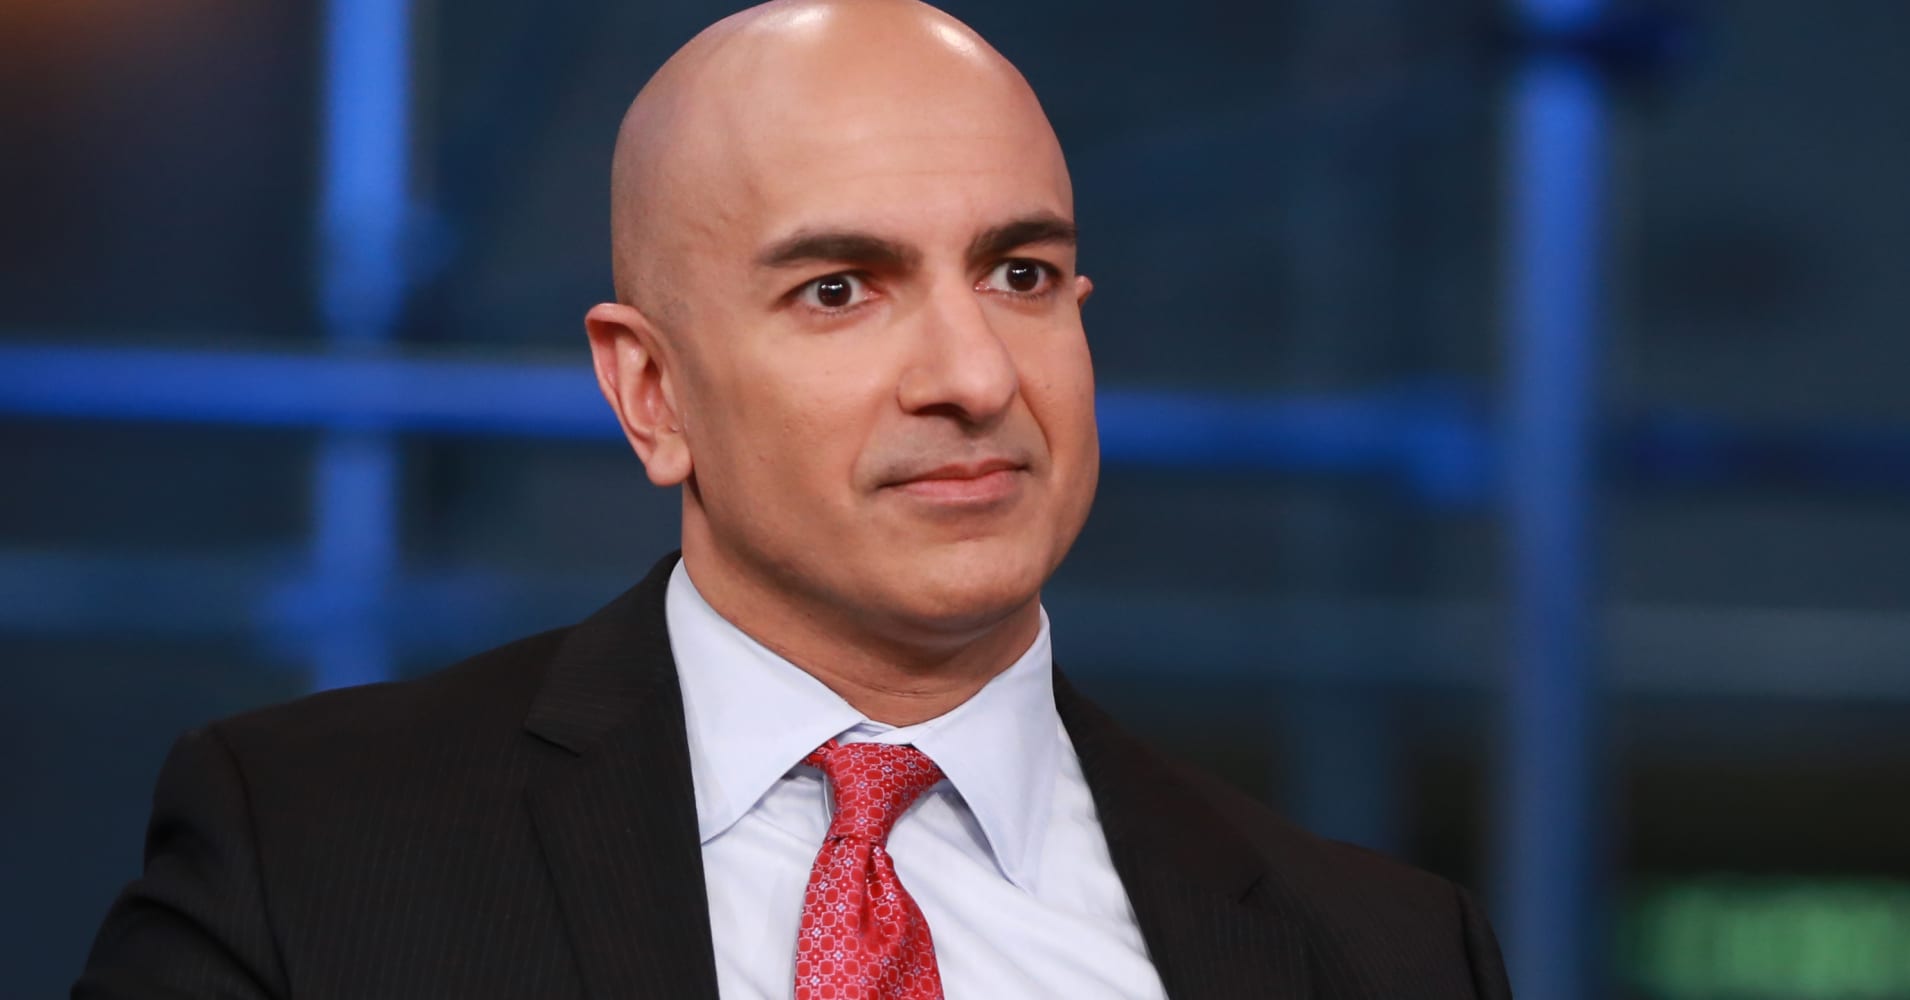 Fed's Kashkari: Without immigration, US economy would grow more slowly - CNBC